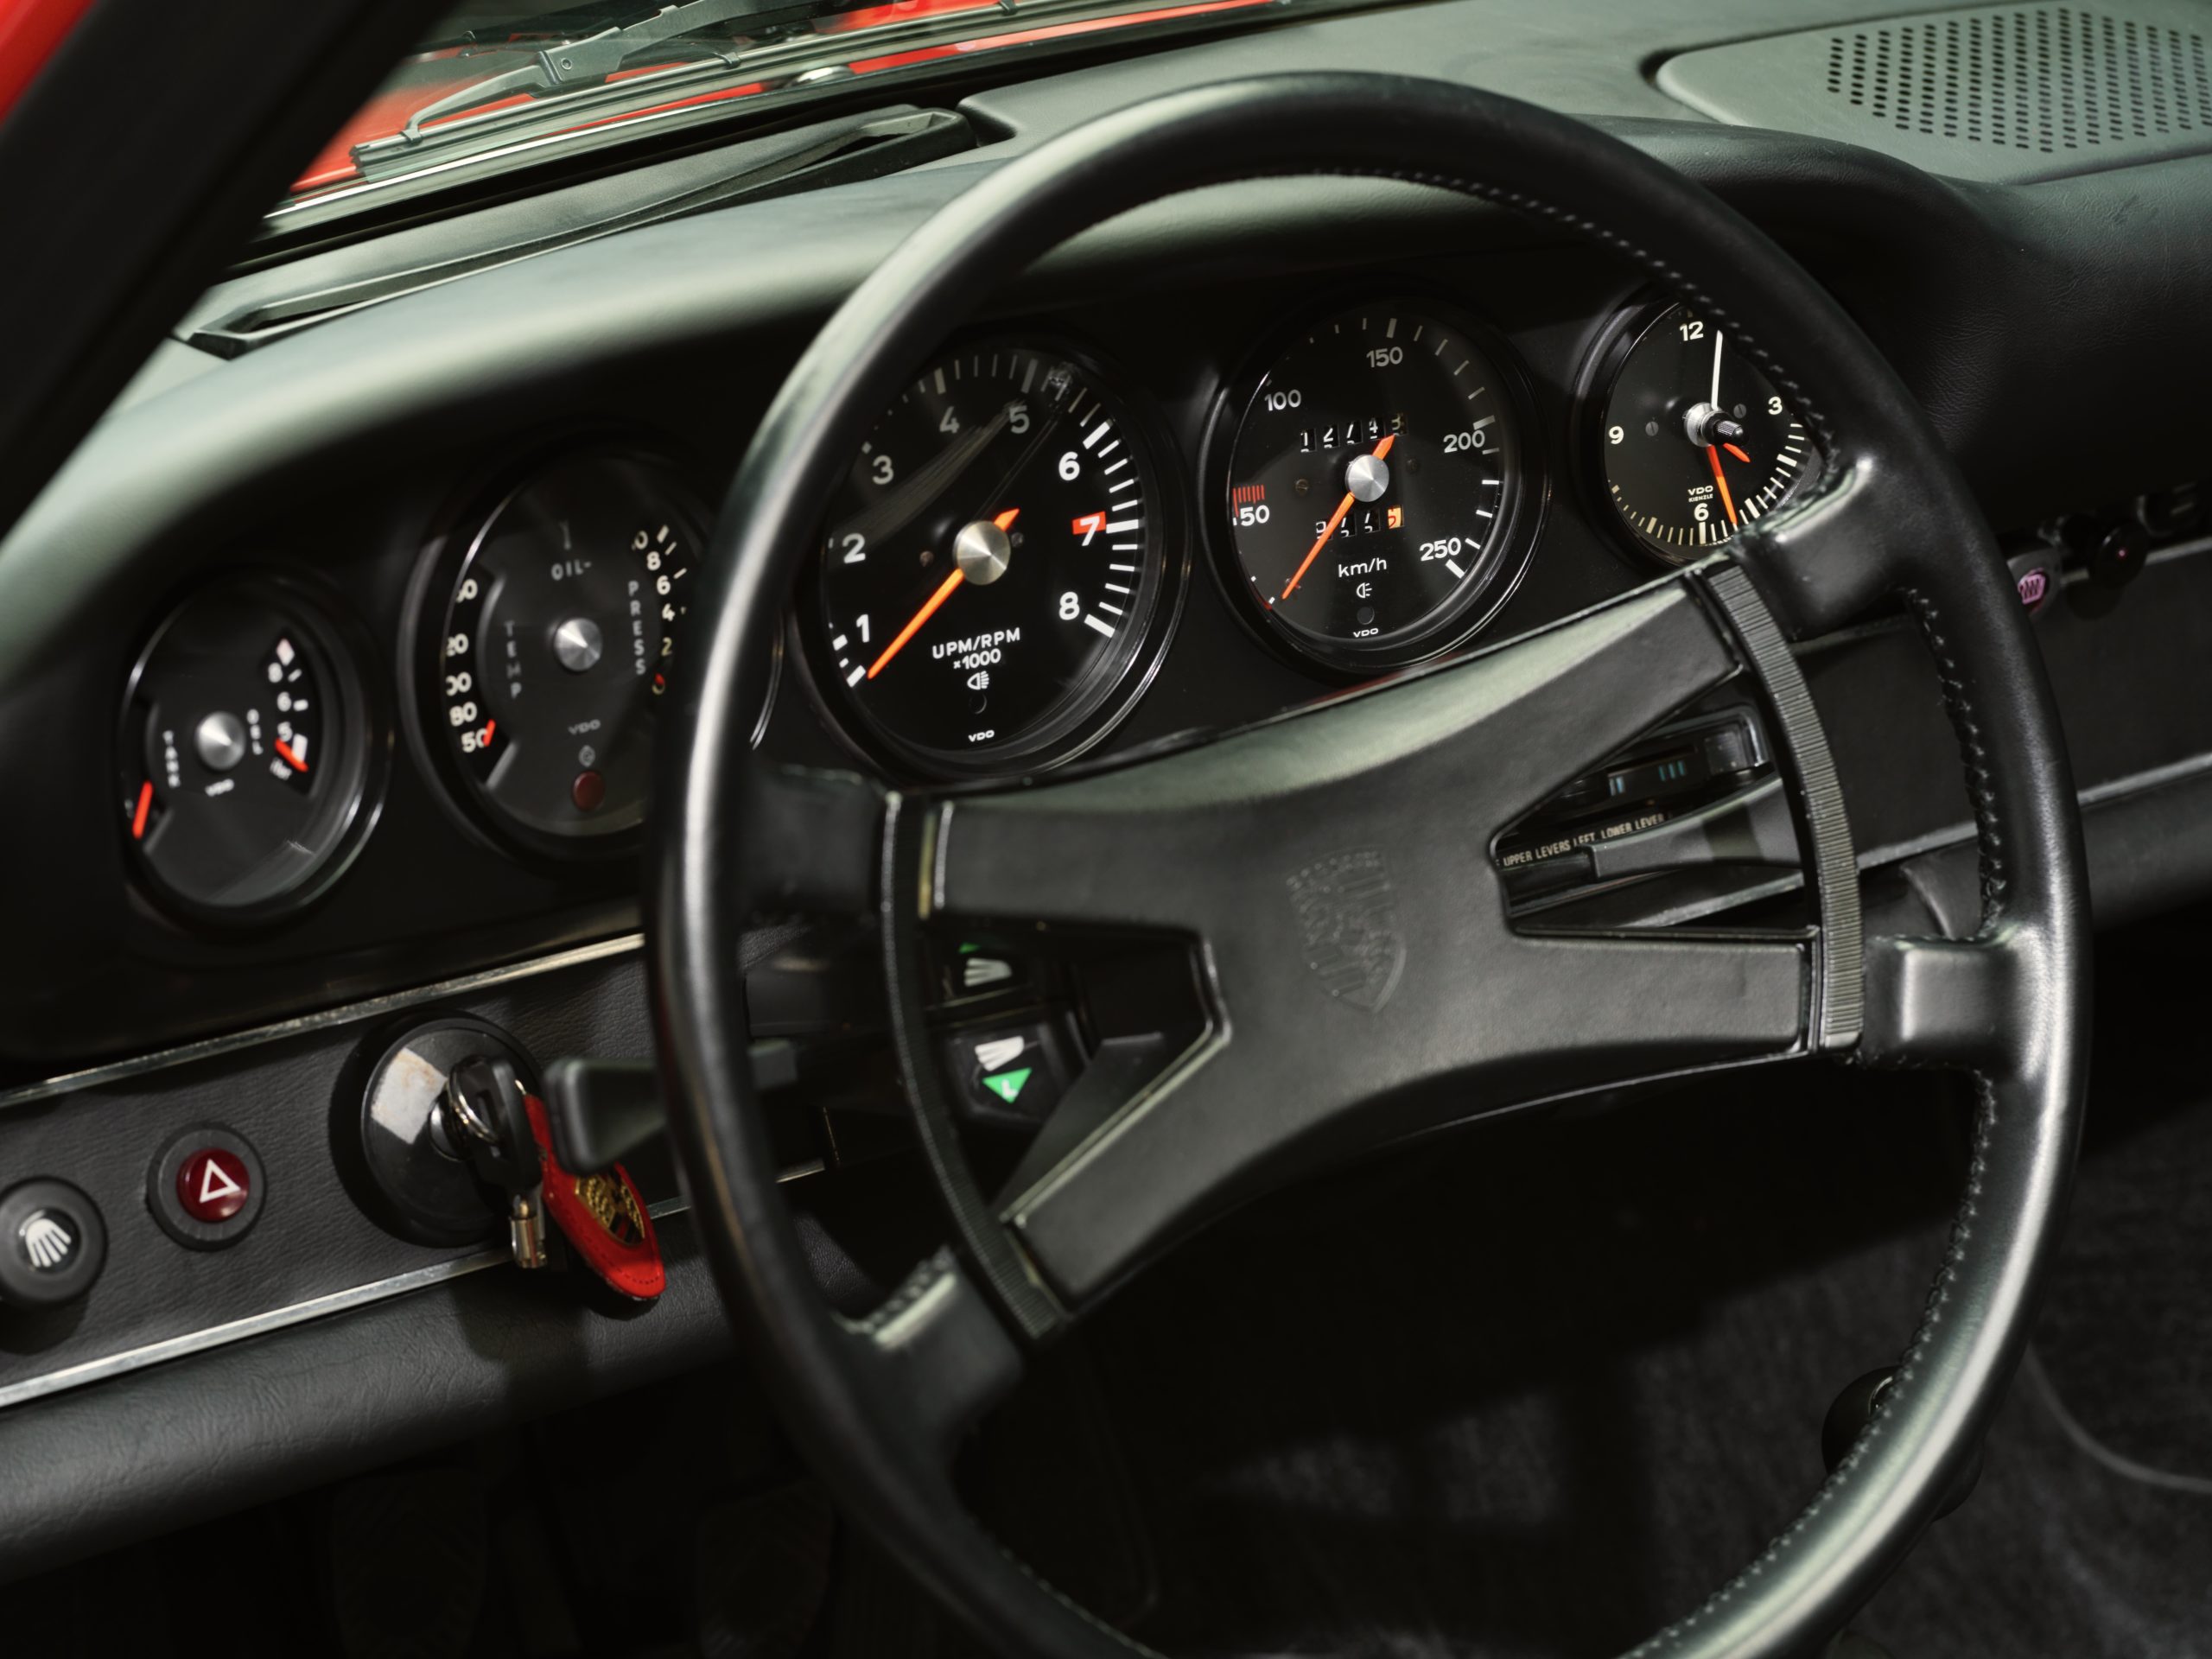 Interior of a 1973 Red Bahia Porsche 911 2.4E Targa fully restored in 2019 with 12.685 km and black leather interior